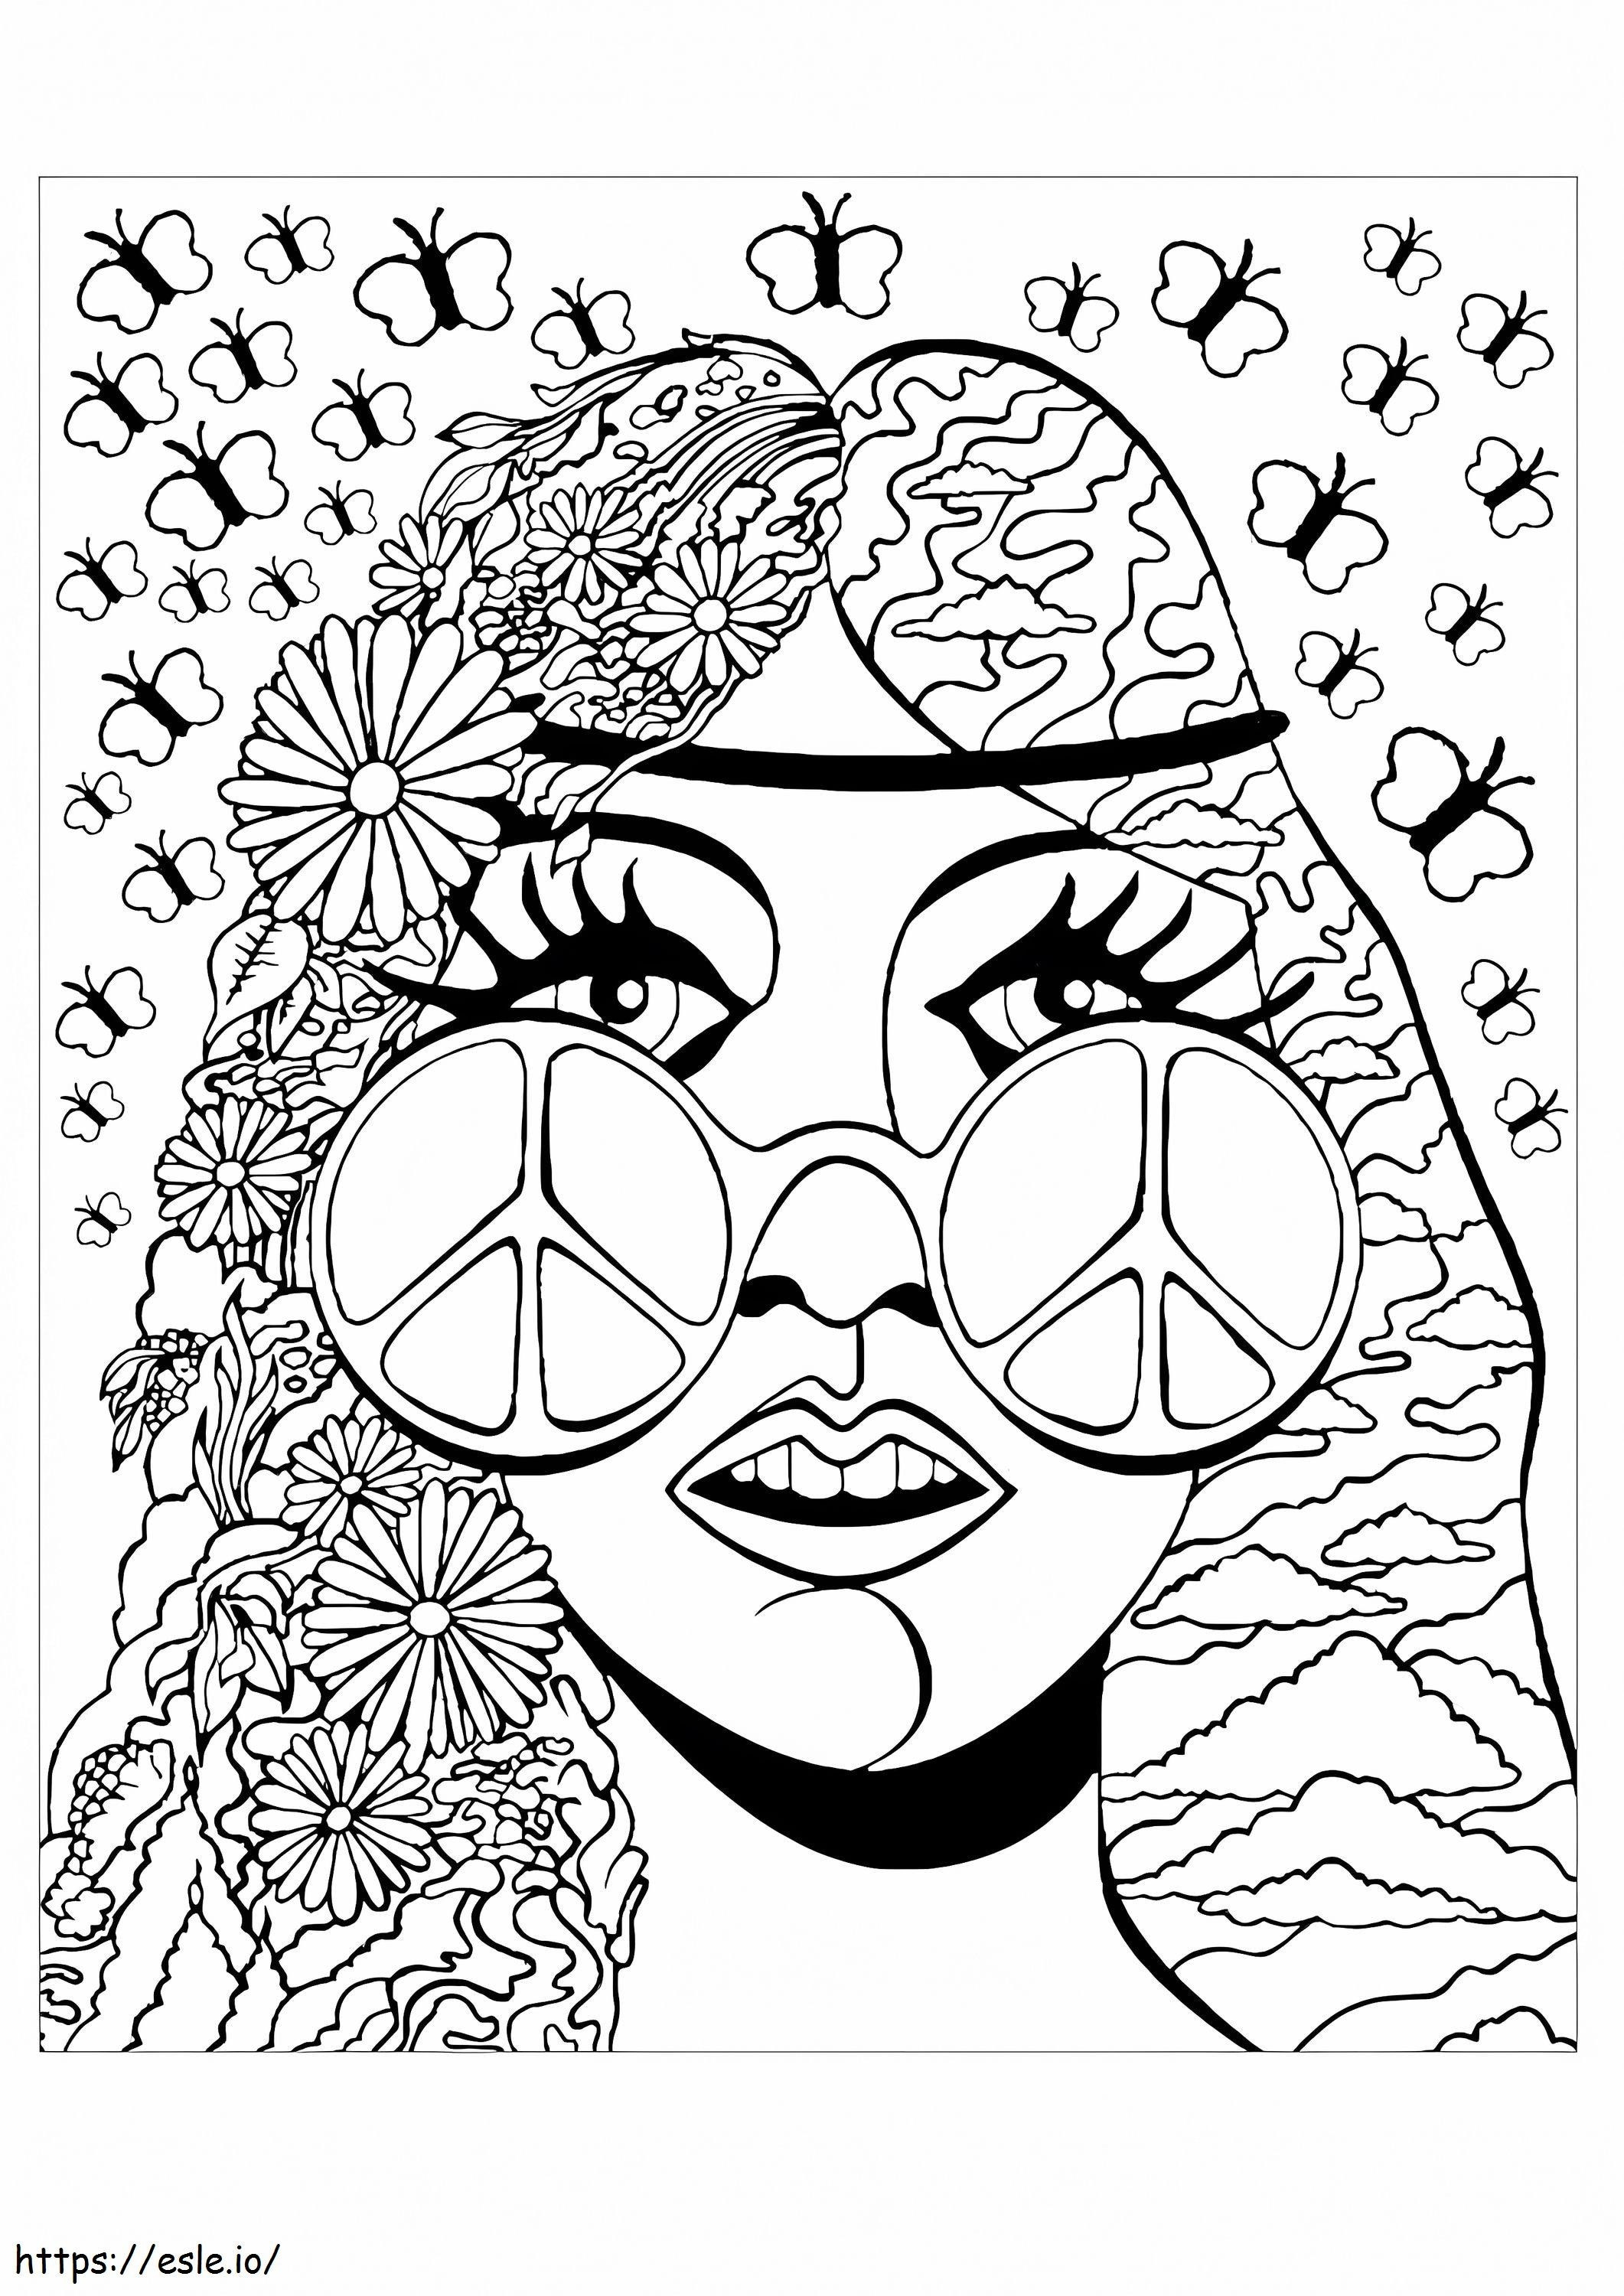 Cool Hippie Girl 1 coloring page